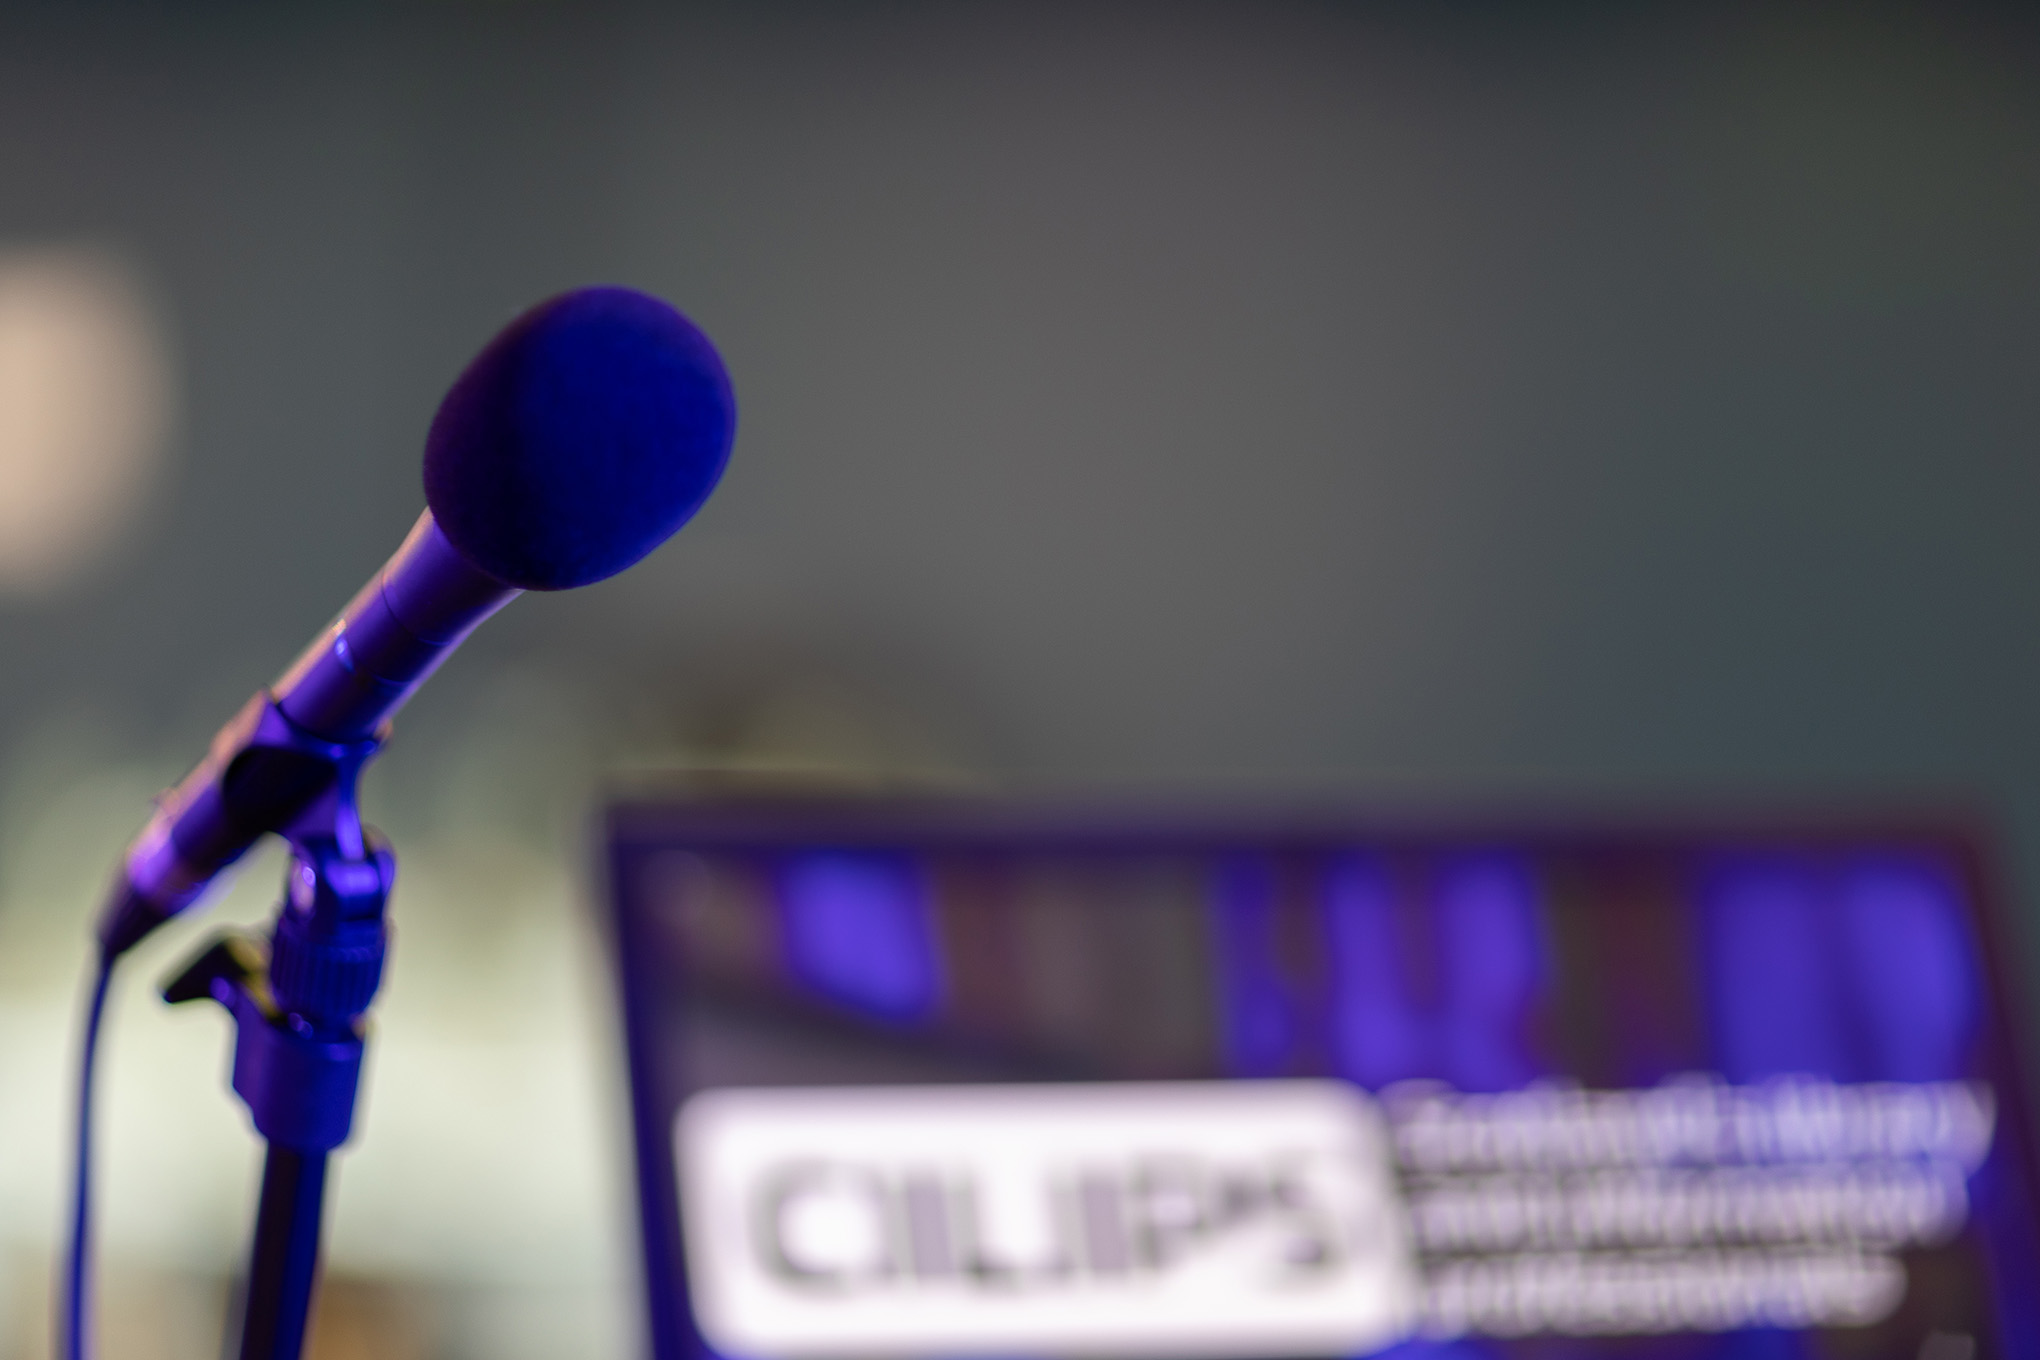 A microphone beside a laptop with the CILIPS logo showing.